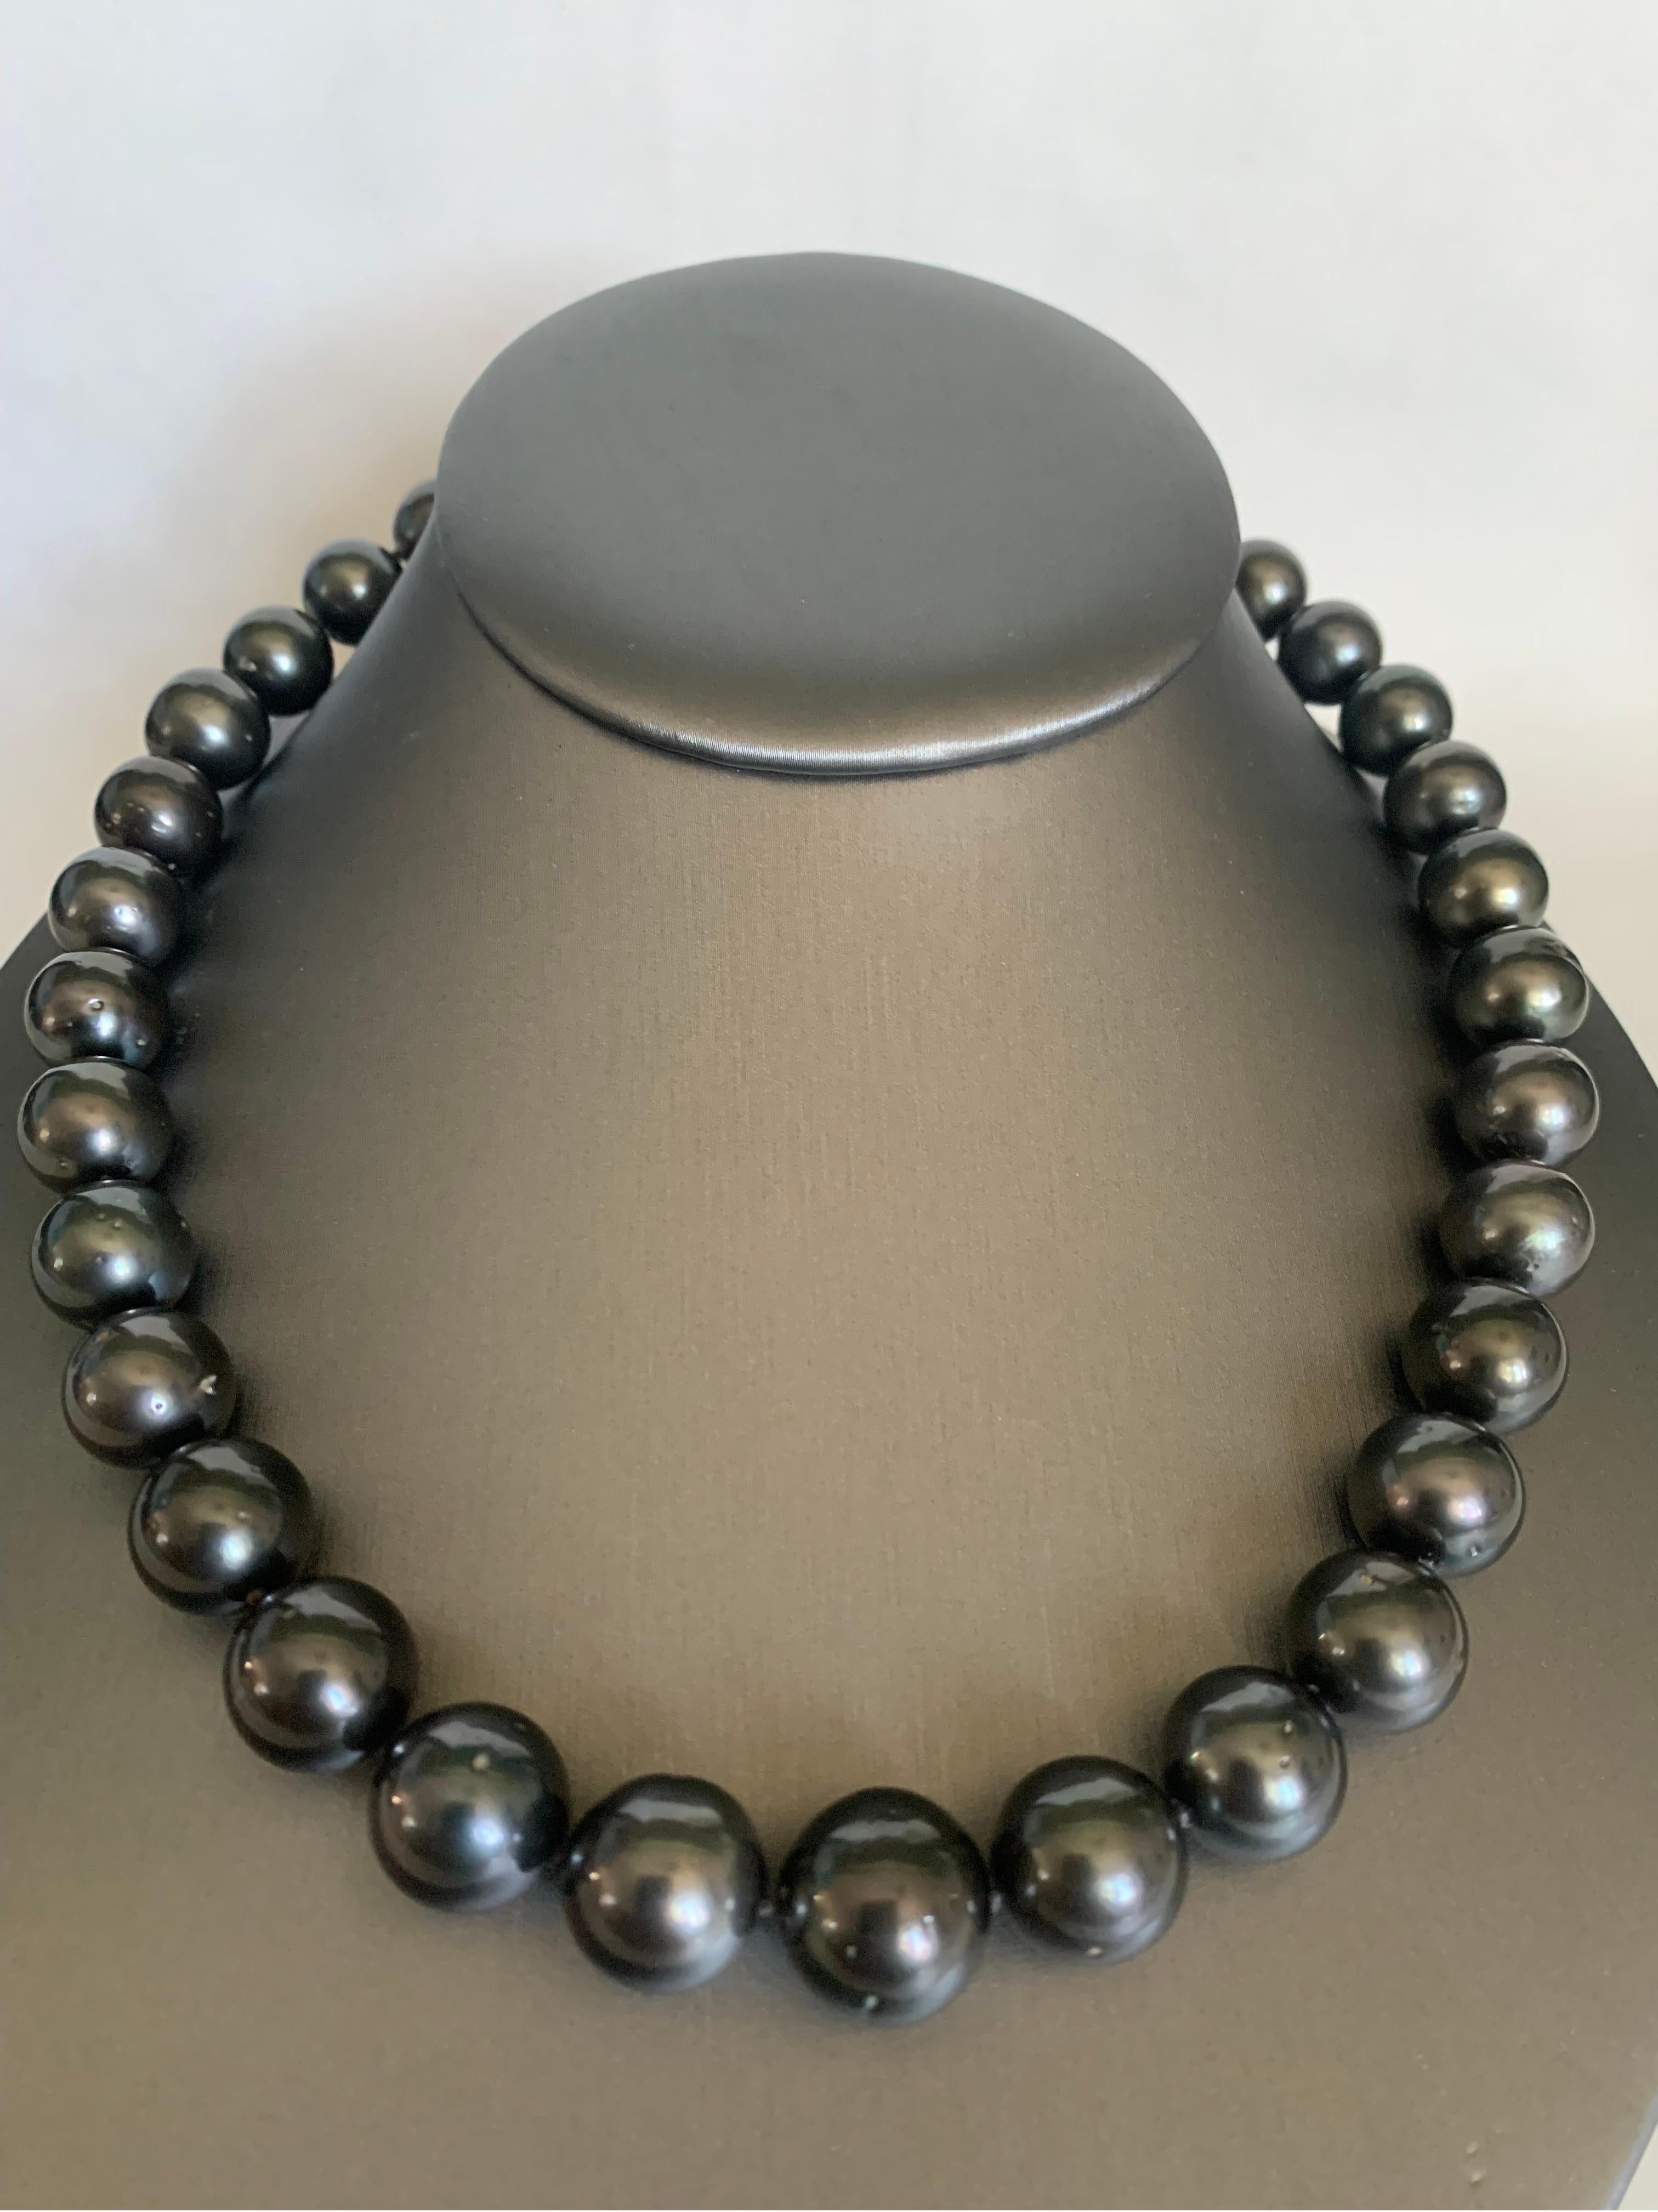 Elevate your look with a timeless graduated pearl necklace. This 18-18.5 inches length strand necklace is fully knotted and hand strung with matching silk cord. The necklace comprises 33 vivid sheen dark Tahitian pearls measuring 12-14.8 mm and